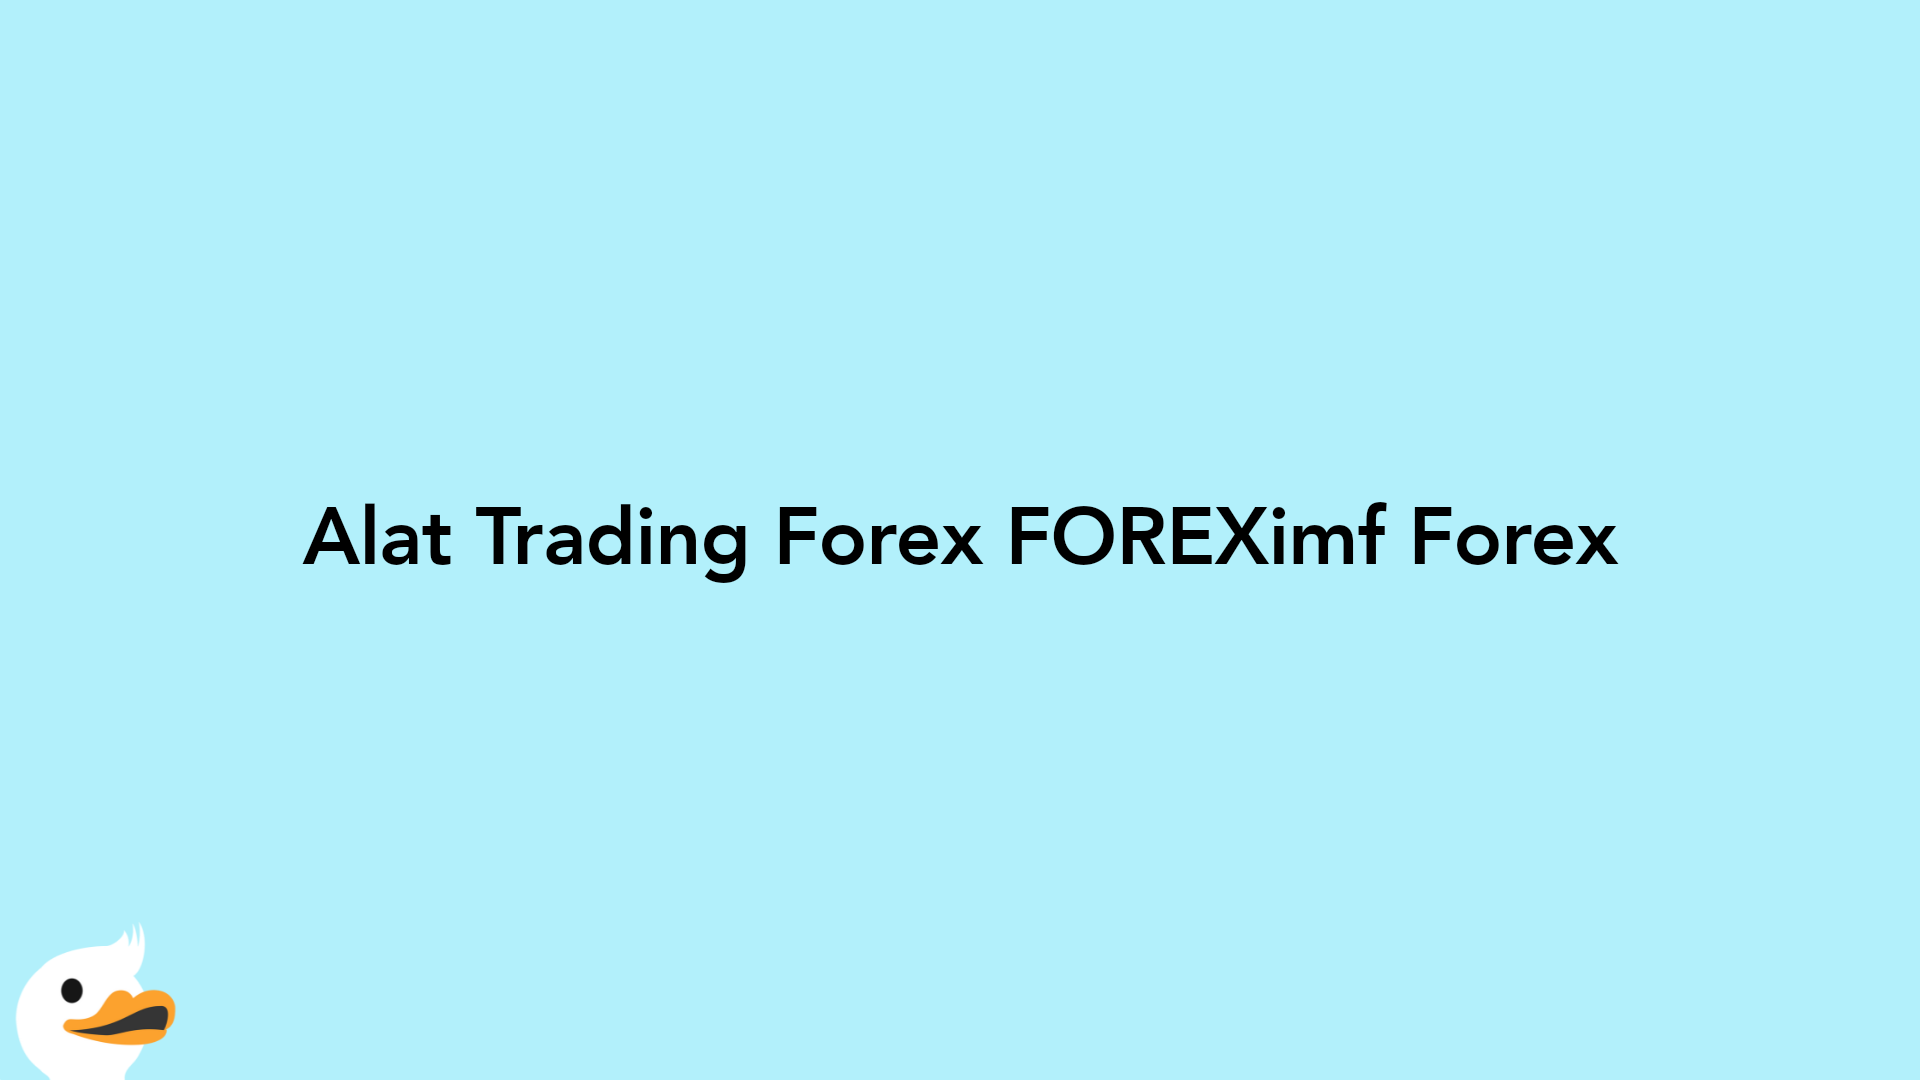 Alat Trading Forex FOREXimf Forex